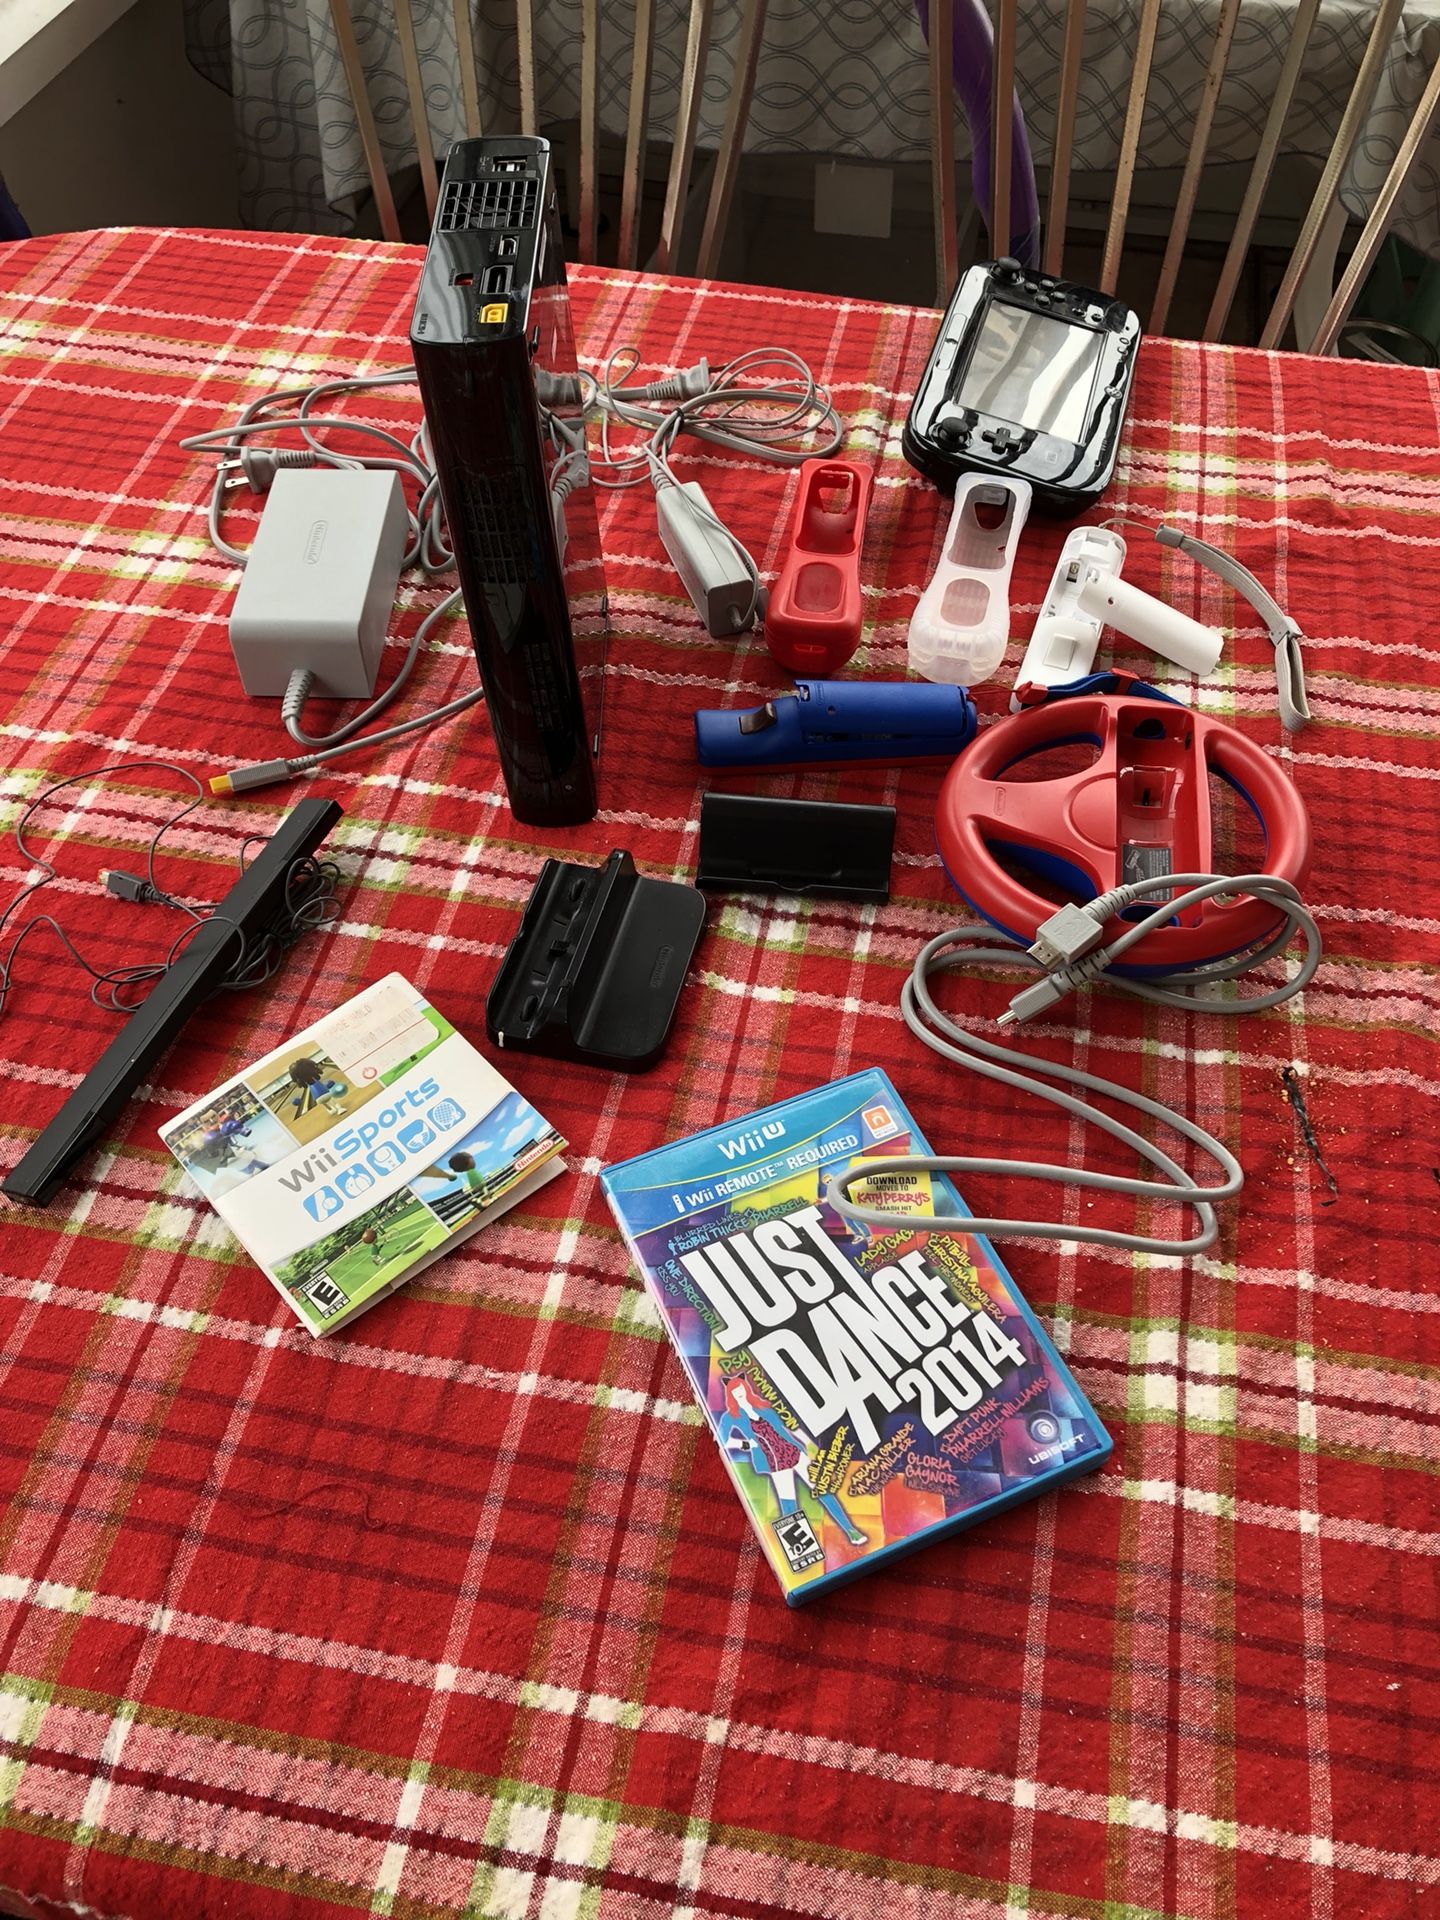 complete set Wii come with 2 games $ 50. Dollar